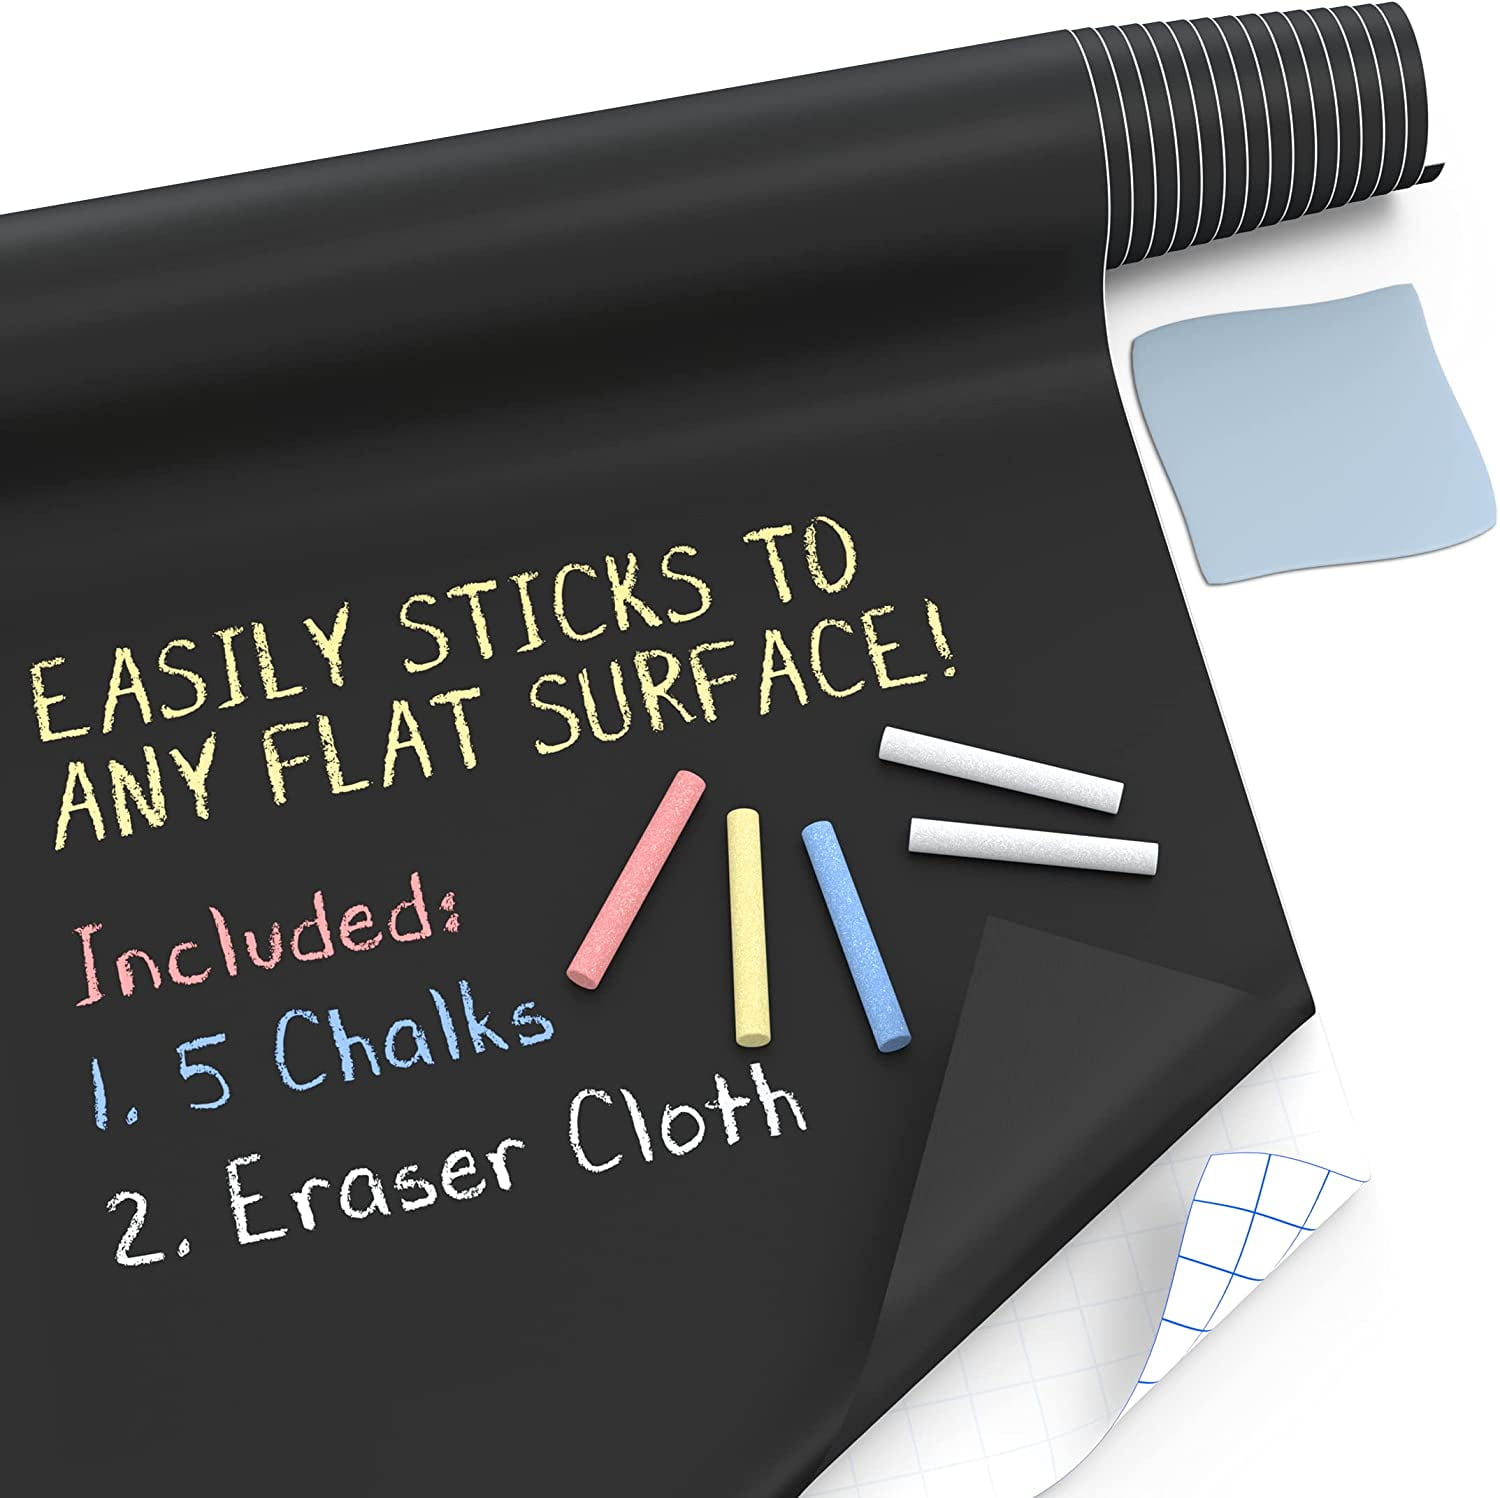  Clear Board Sticker Roll on Wall 18 x 78Inch (6.5 Ft), Includes  3 Dry Erase Markers, Bulletin Board Paper, Clear Adhesive Vinyl Sheets,  Transparent Contact Paper, Peel and Stick Film by